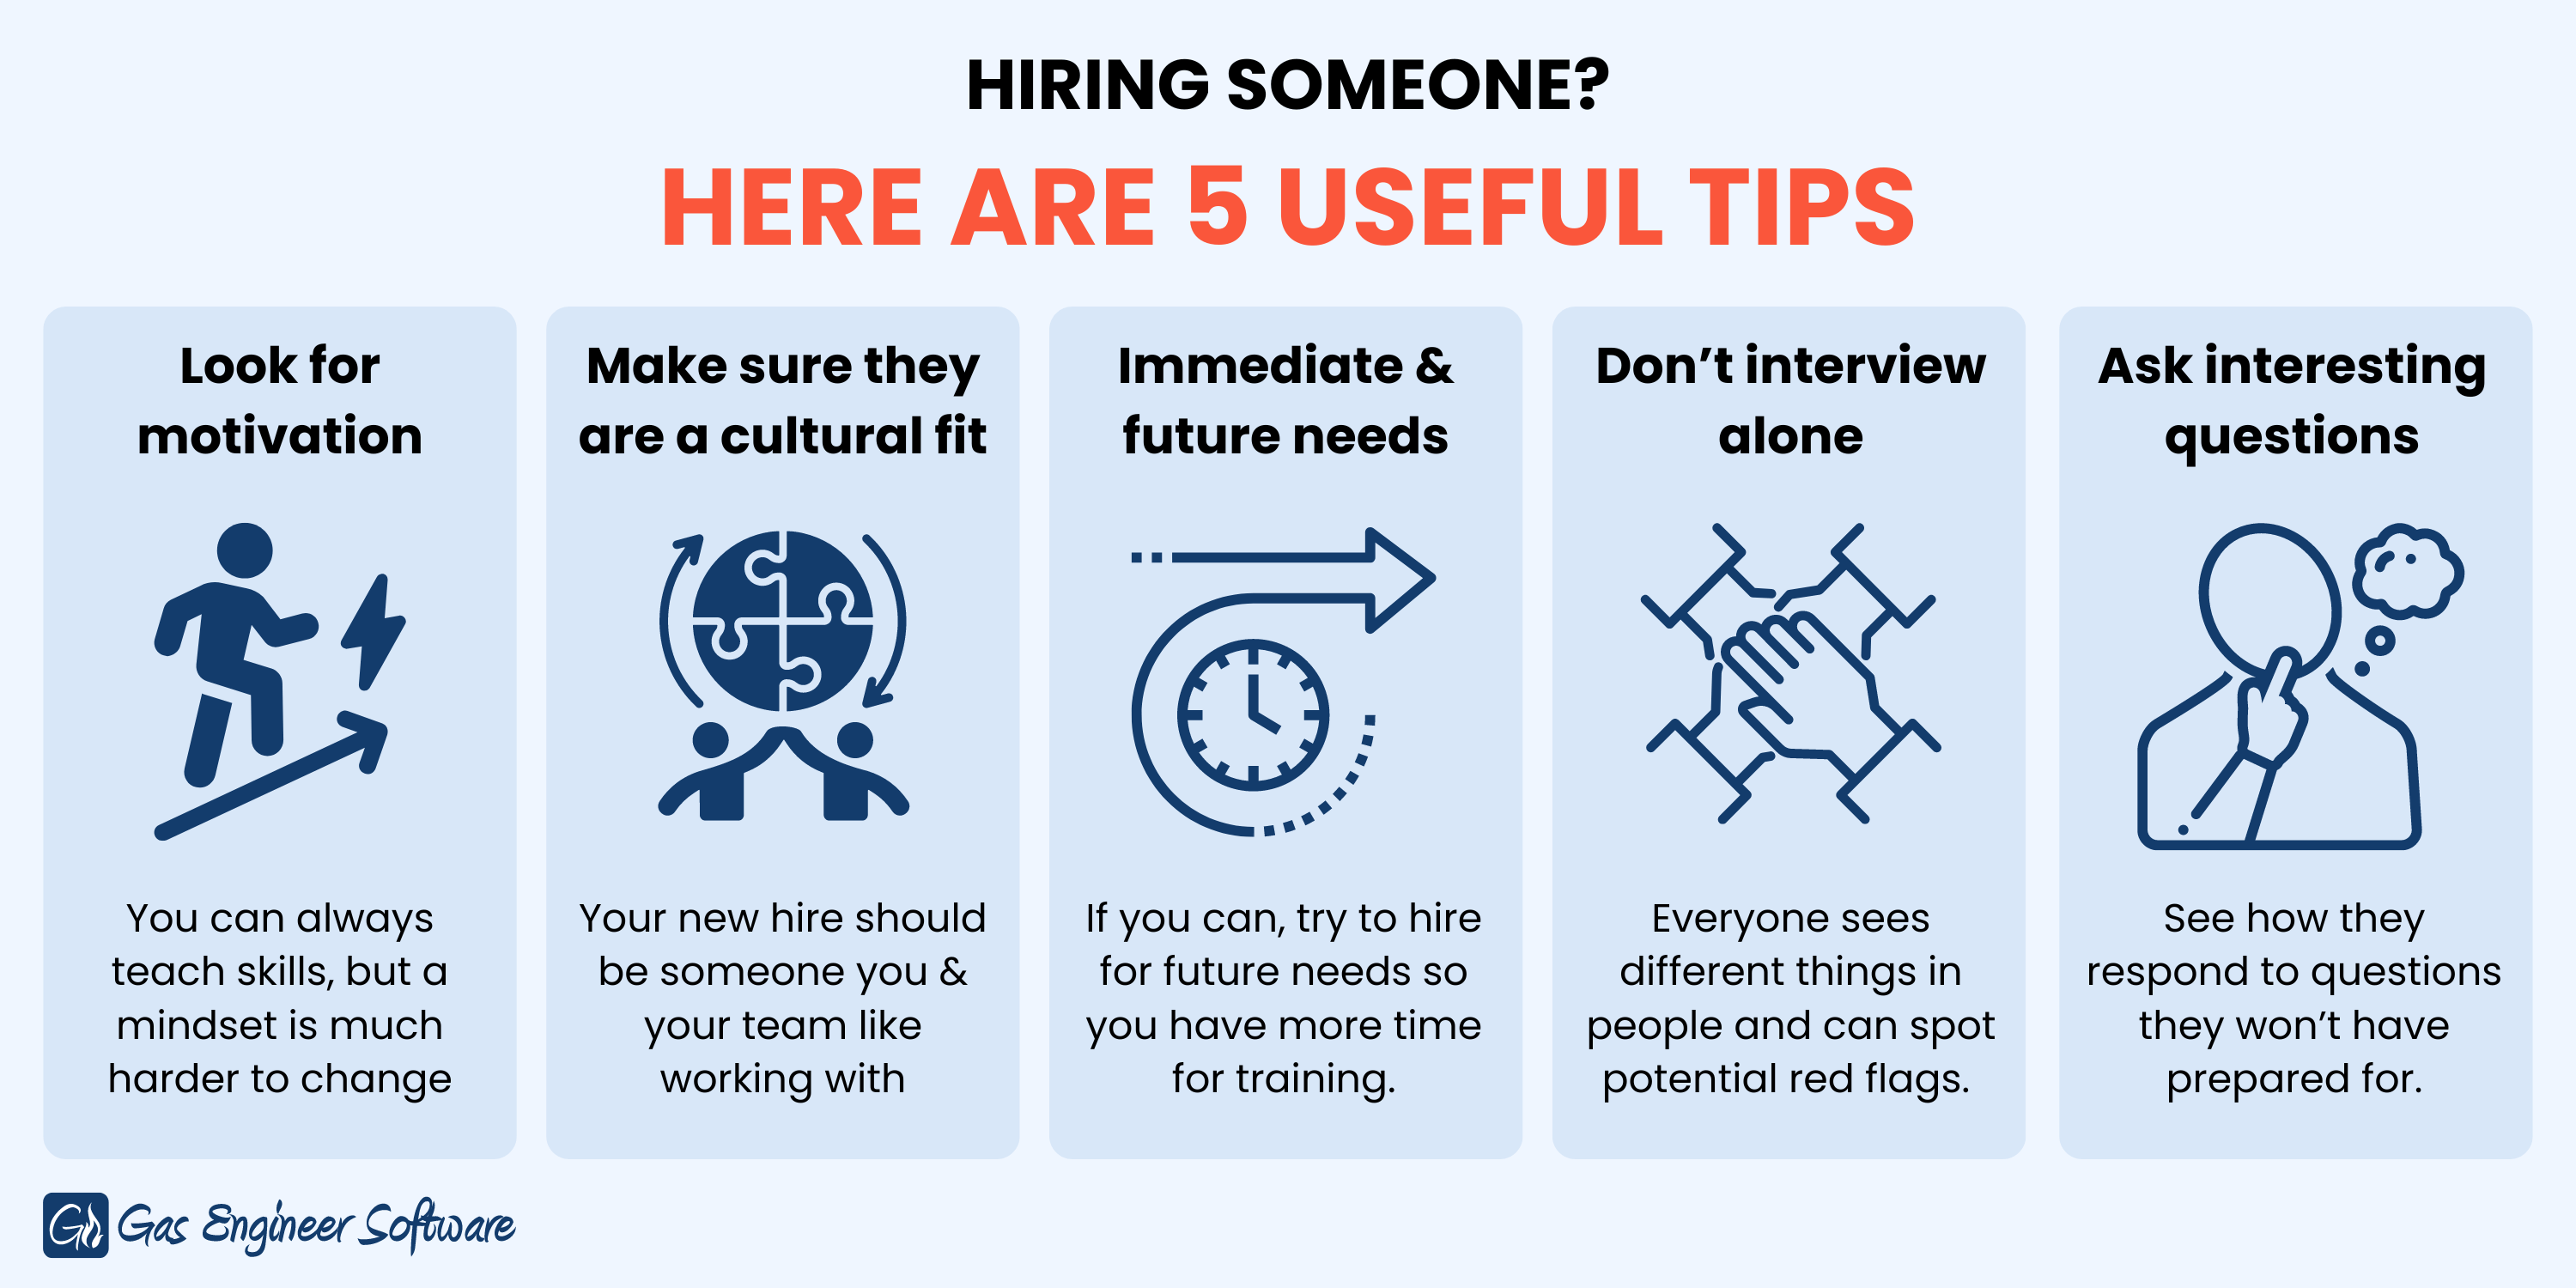 5 tips for your next hire